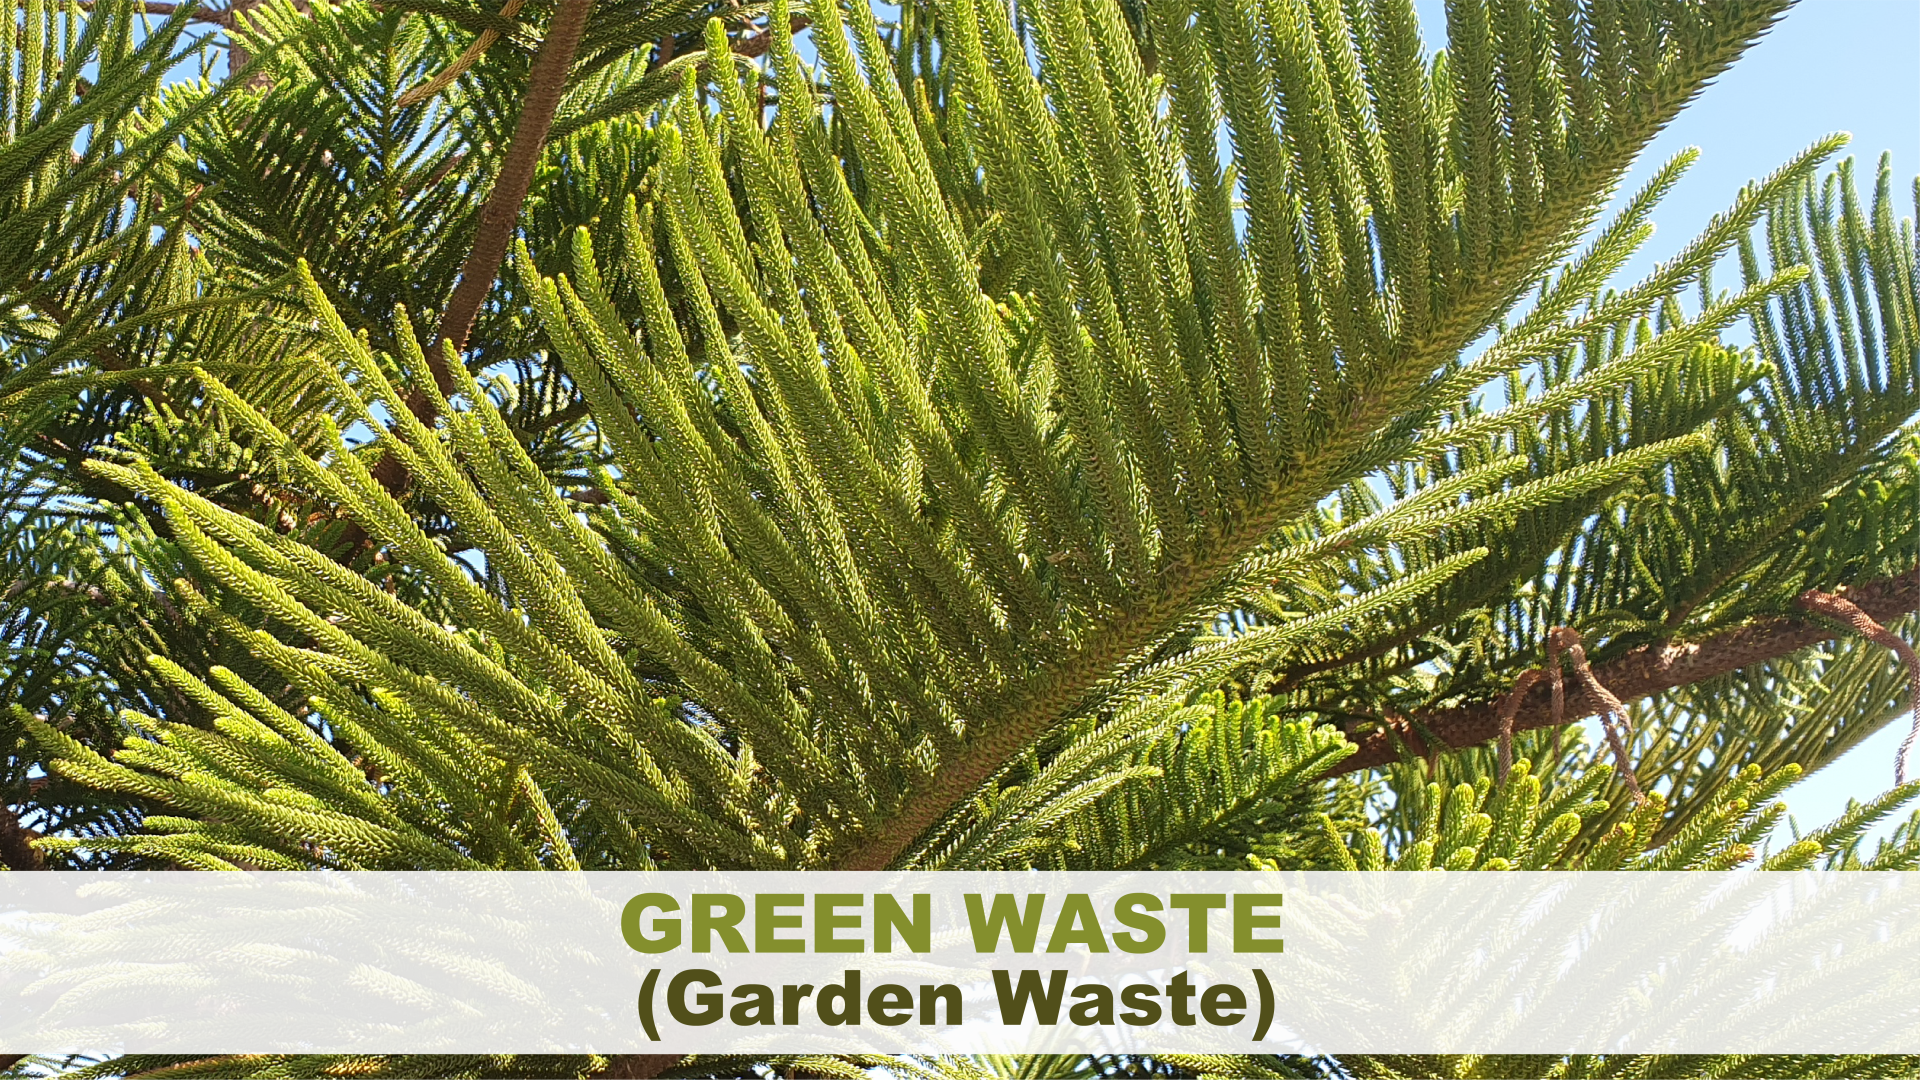 Recycling green waste